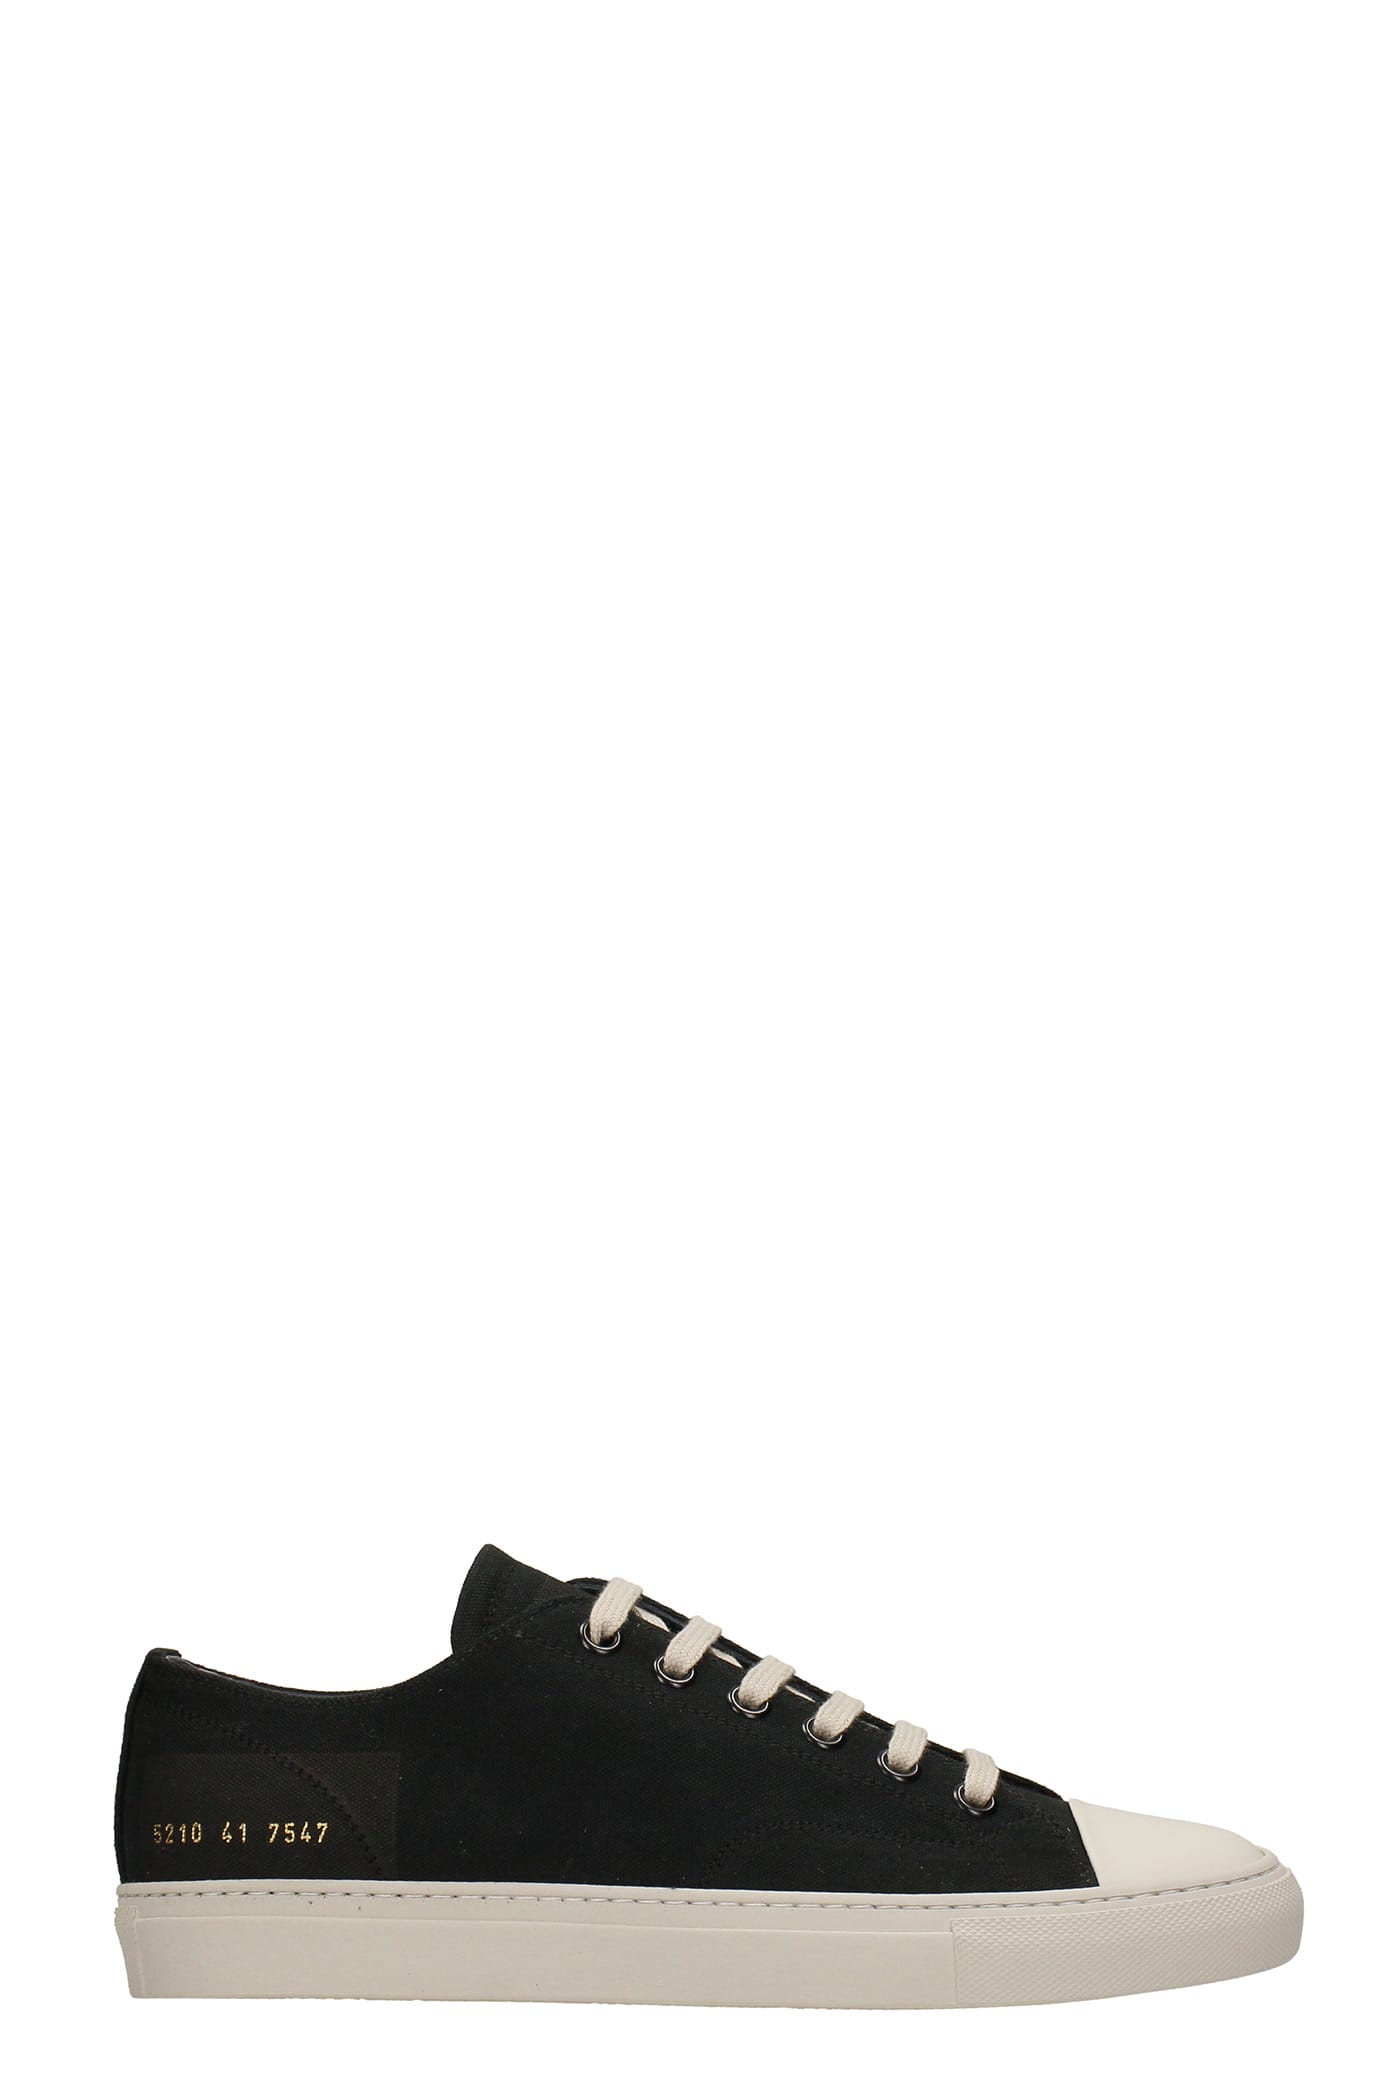 Common Projects Tornament Sneakers In Black Canvas